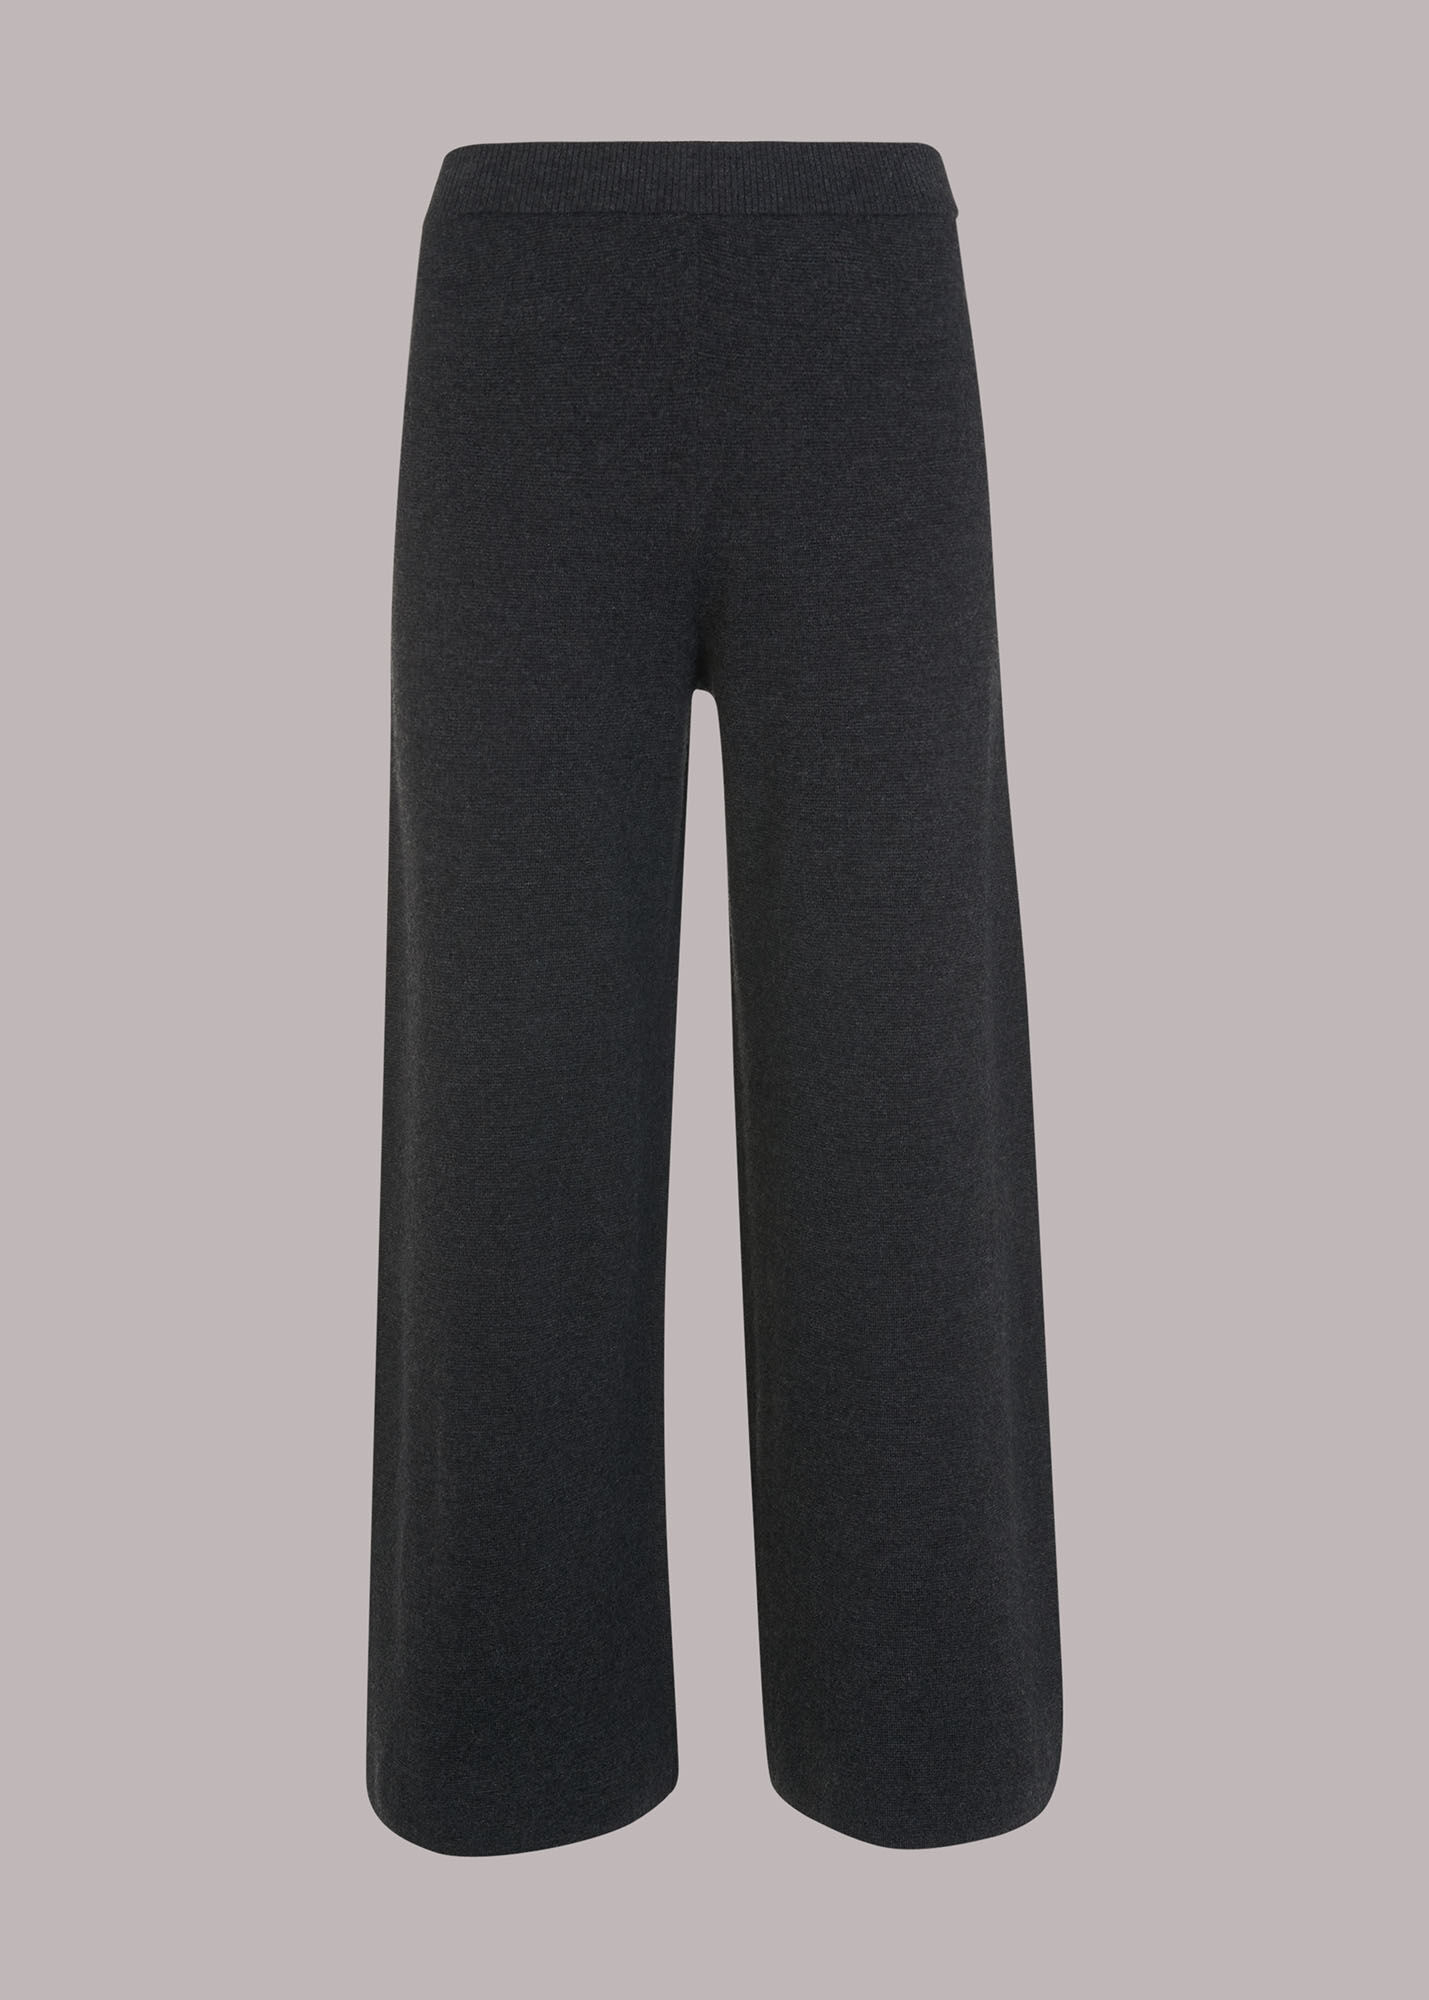 Grey Marl Knitted Wide Leg Marl Trouser | WHISTLES